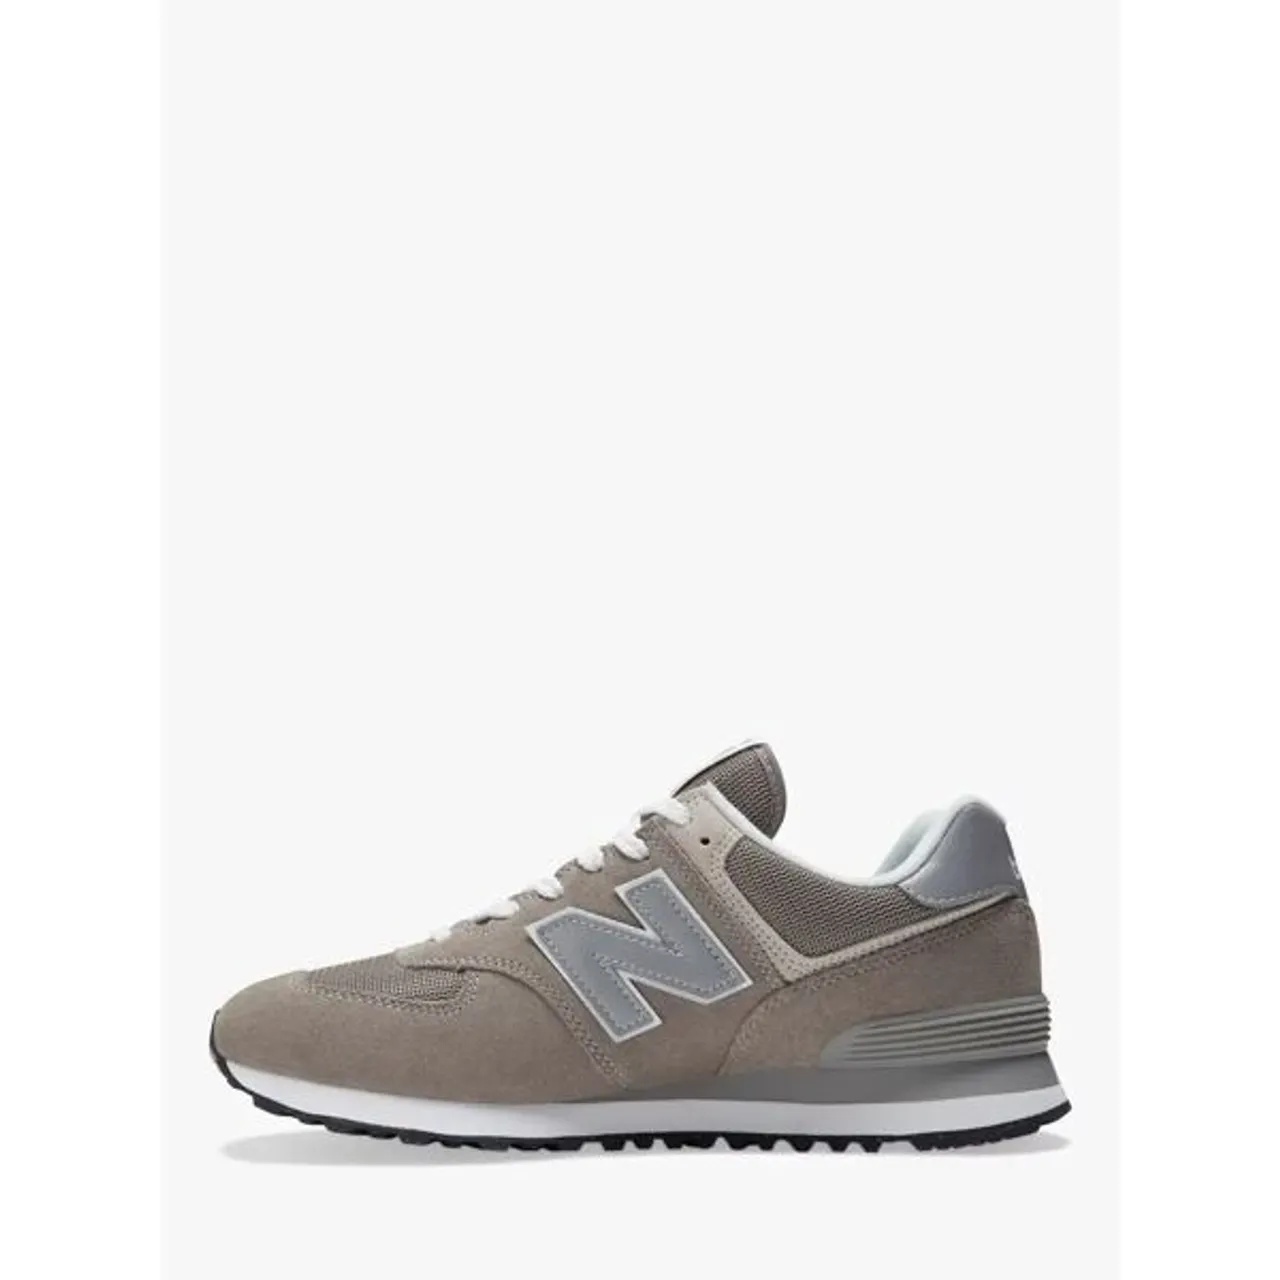 New Balance 574 Suede Trainers - Grey/White - Male